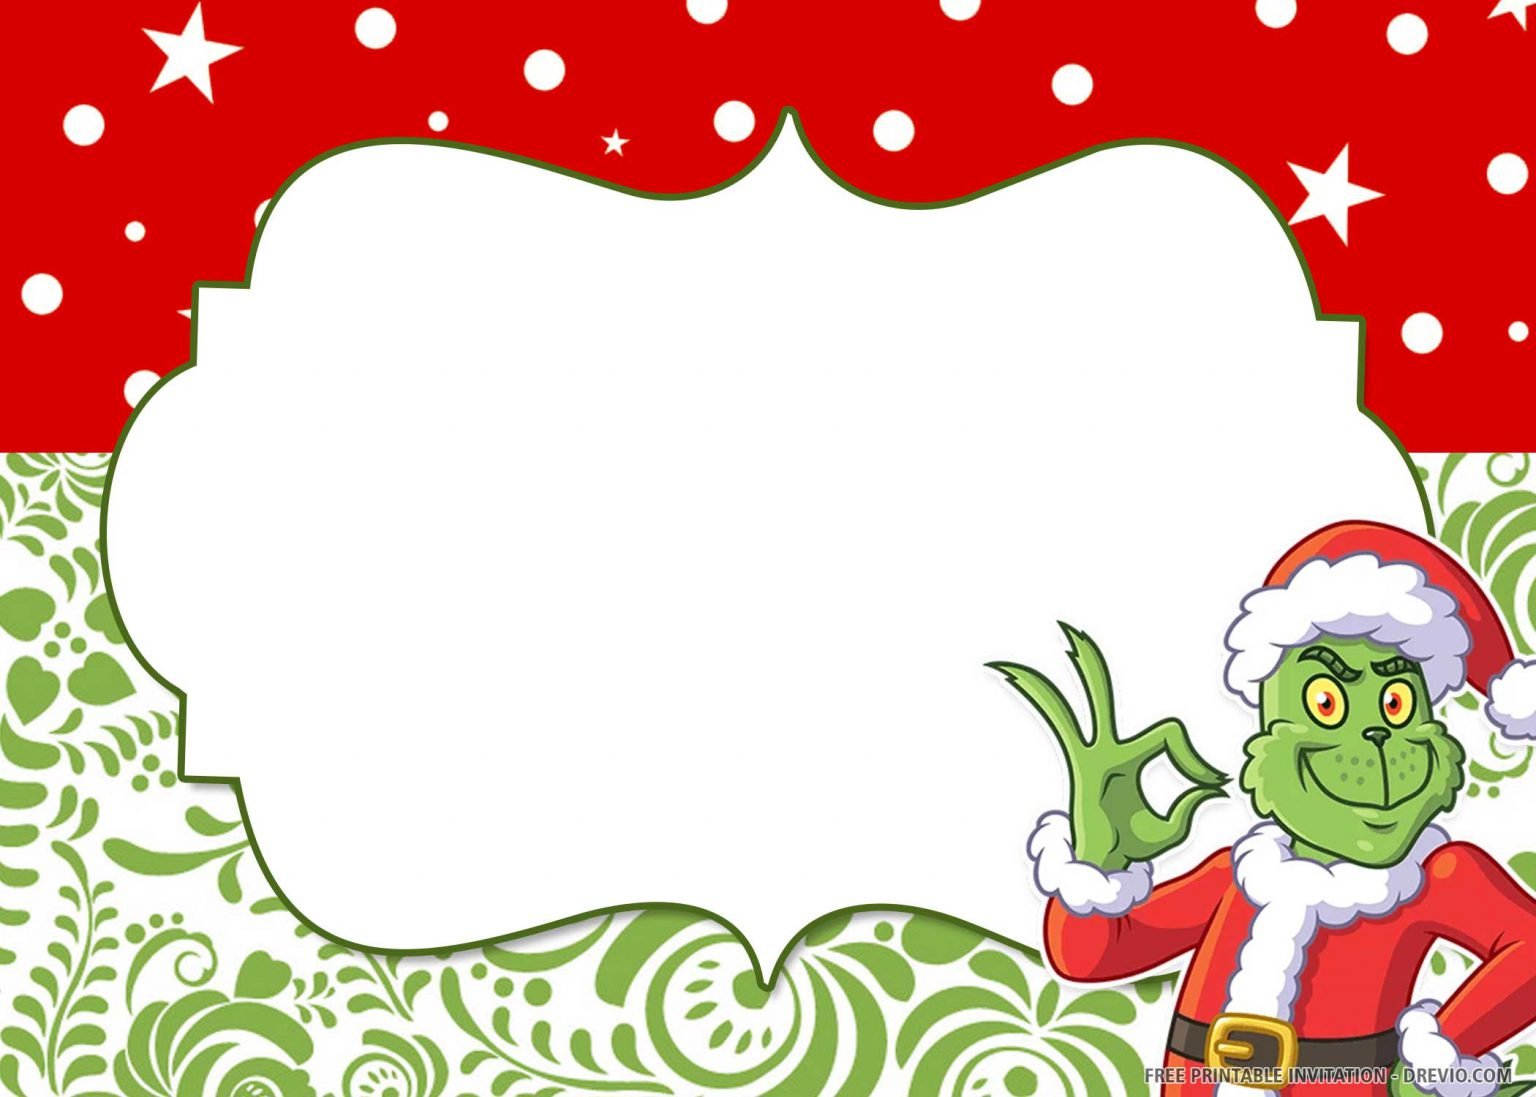 the-grinch-2018-invitation-cristmas-download-hundreds-free-printable